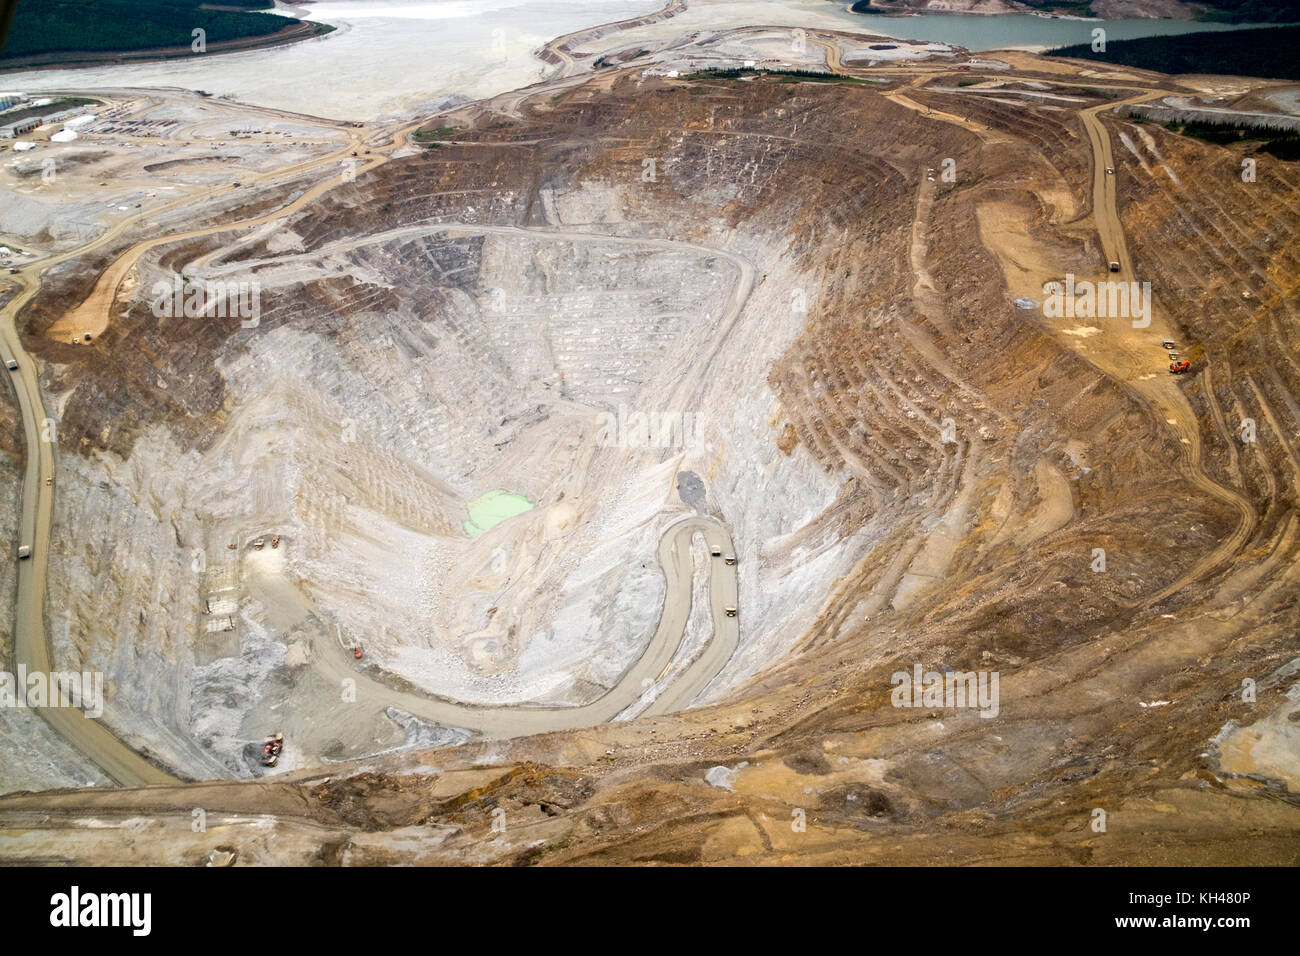 An aerial view of the large Fort Knox Gold Mine, just north of Fairbanks, Alaska. This open-pit gold mining operation is the largest of its kind in Al Stock Photo